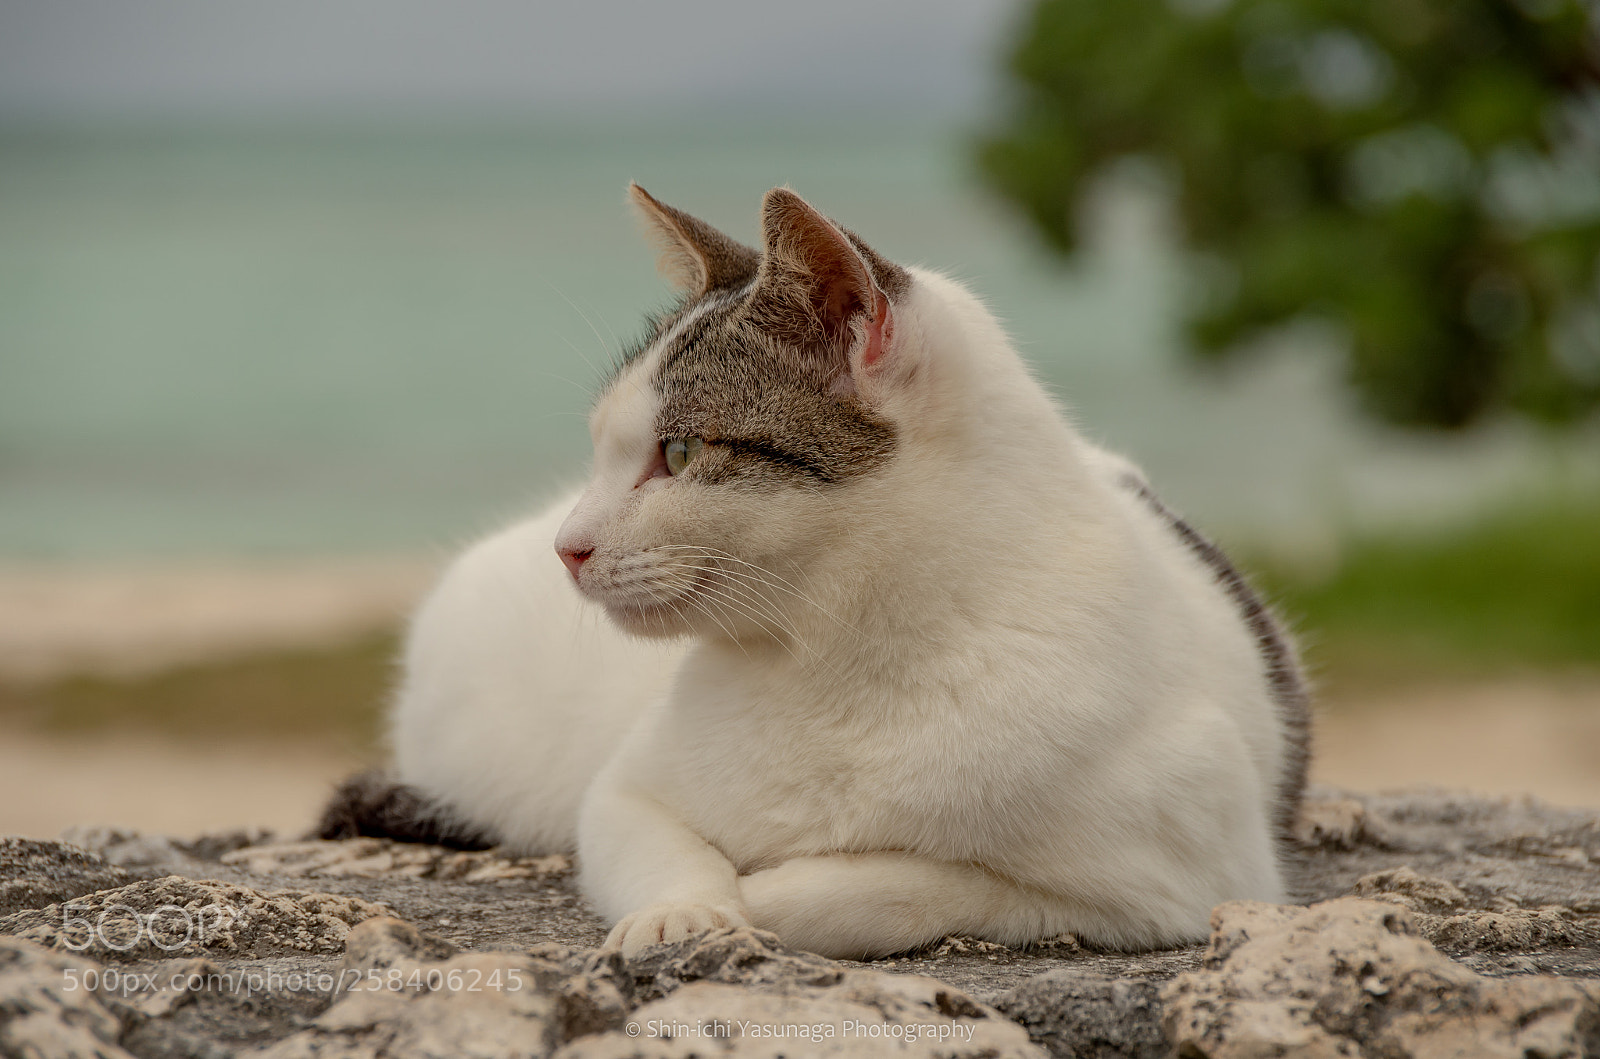 Pentax K-30 sample photo. A cat in the photography